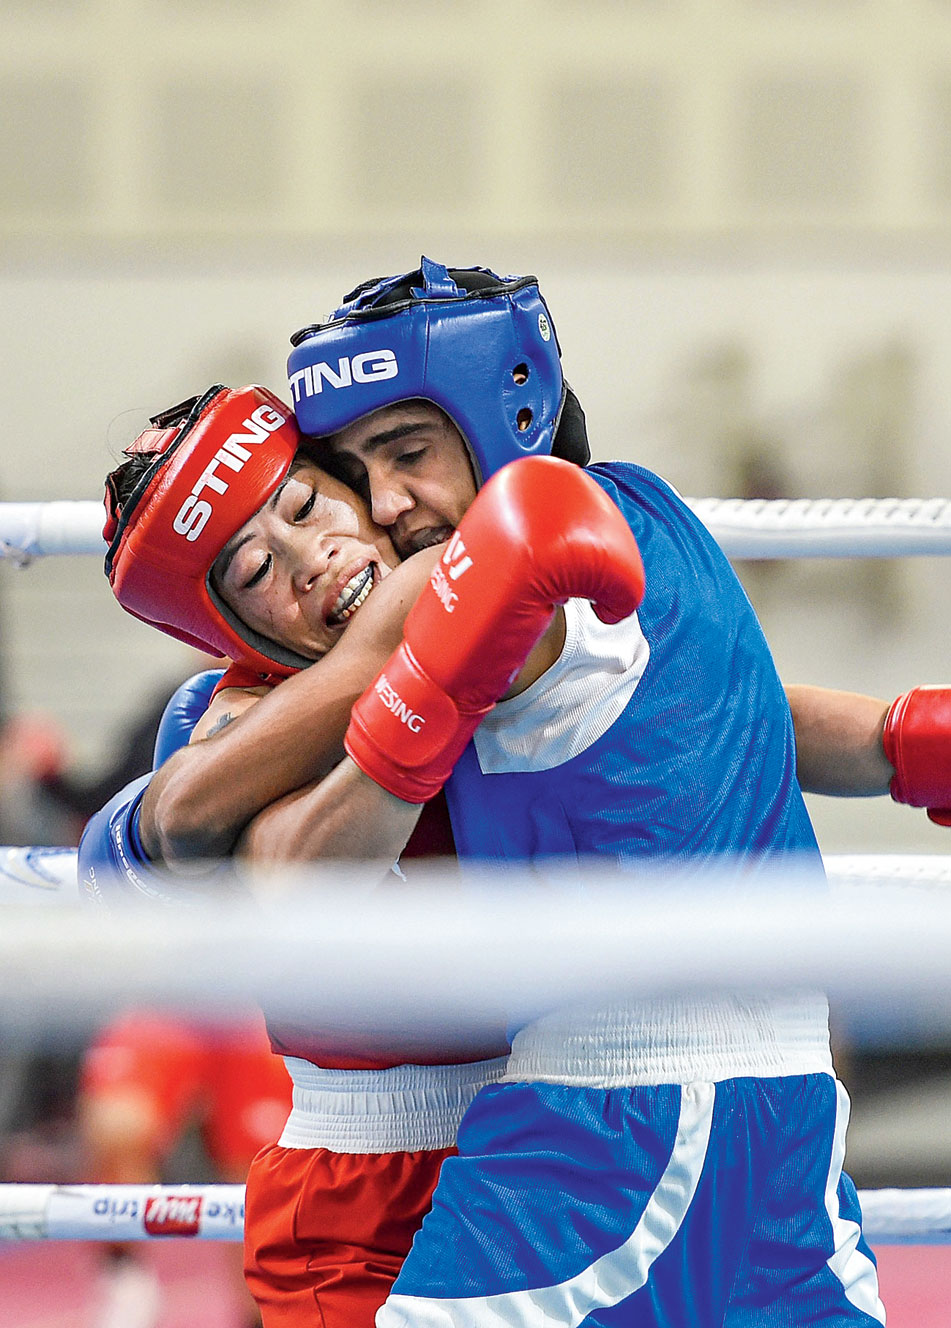 Mary Kom during her bout against Ritu Grewal during the trial for the Olympic qualifiers in New Delhi on Friday
